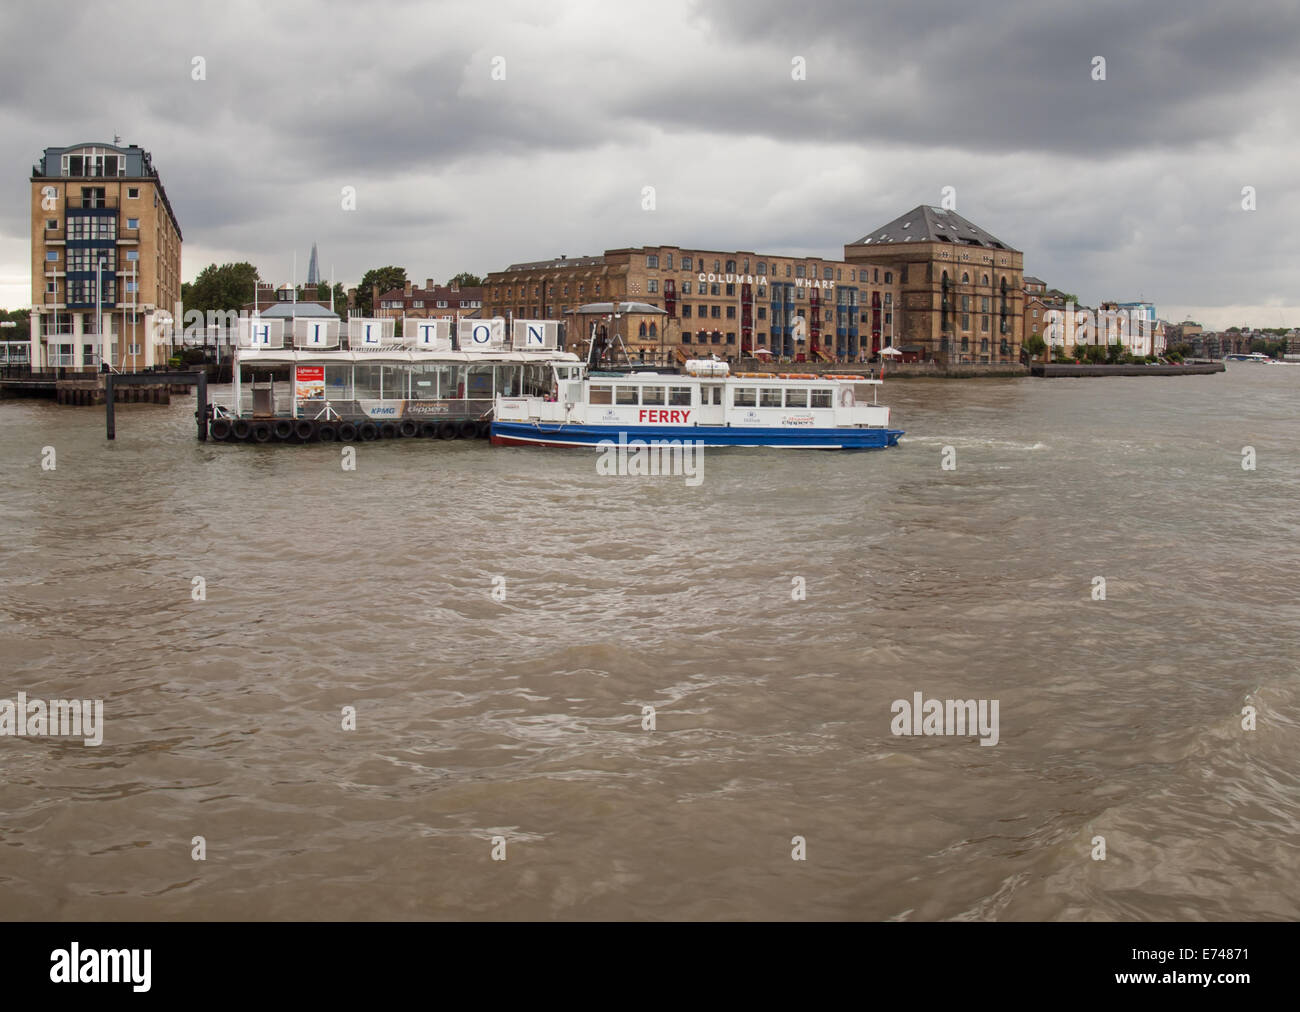 the hilton pier with ferry boat, hilton docklands and the columbia wharf building london rotherhithe Stock Photo